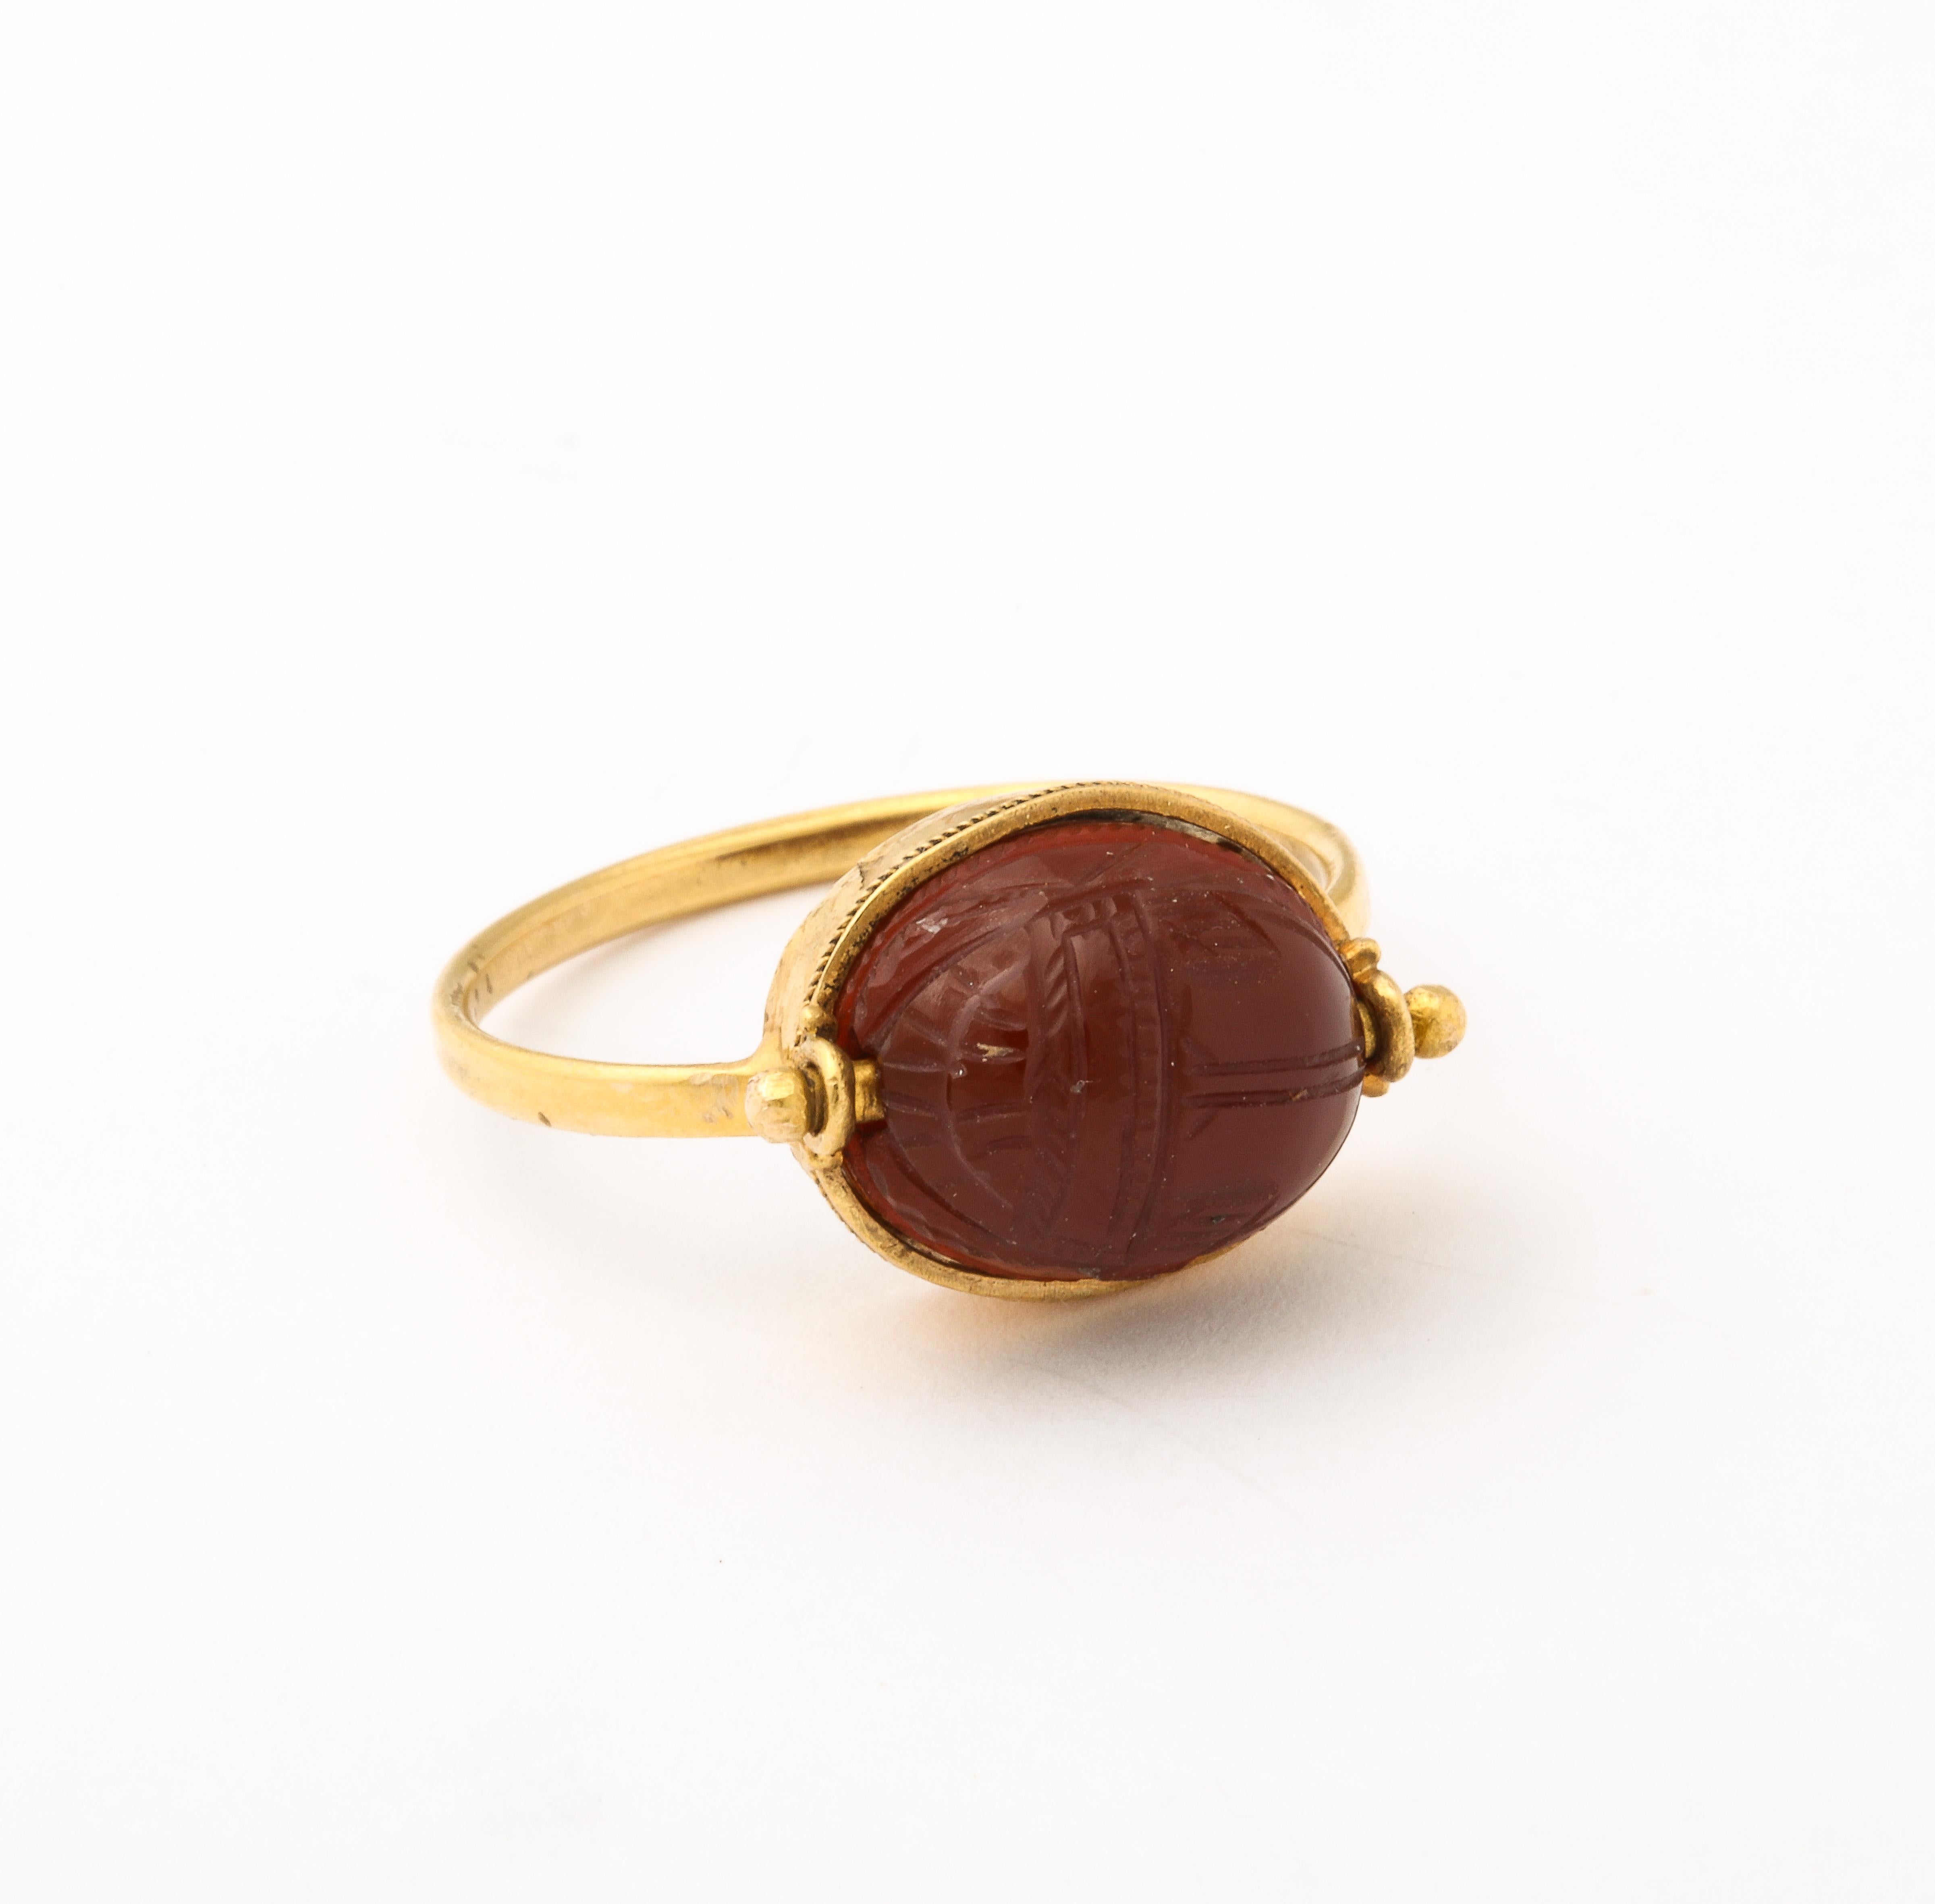 An Egyptian Revival Carnelian Scarab ring, set in 18kt gold is orange brown in color and was created in c. 1880.  I love the fact that the ring rotates and shows a potter creating an urn on the reverse. This fuels my imagination and makes the time